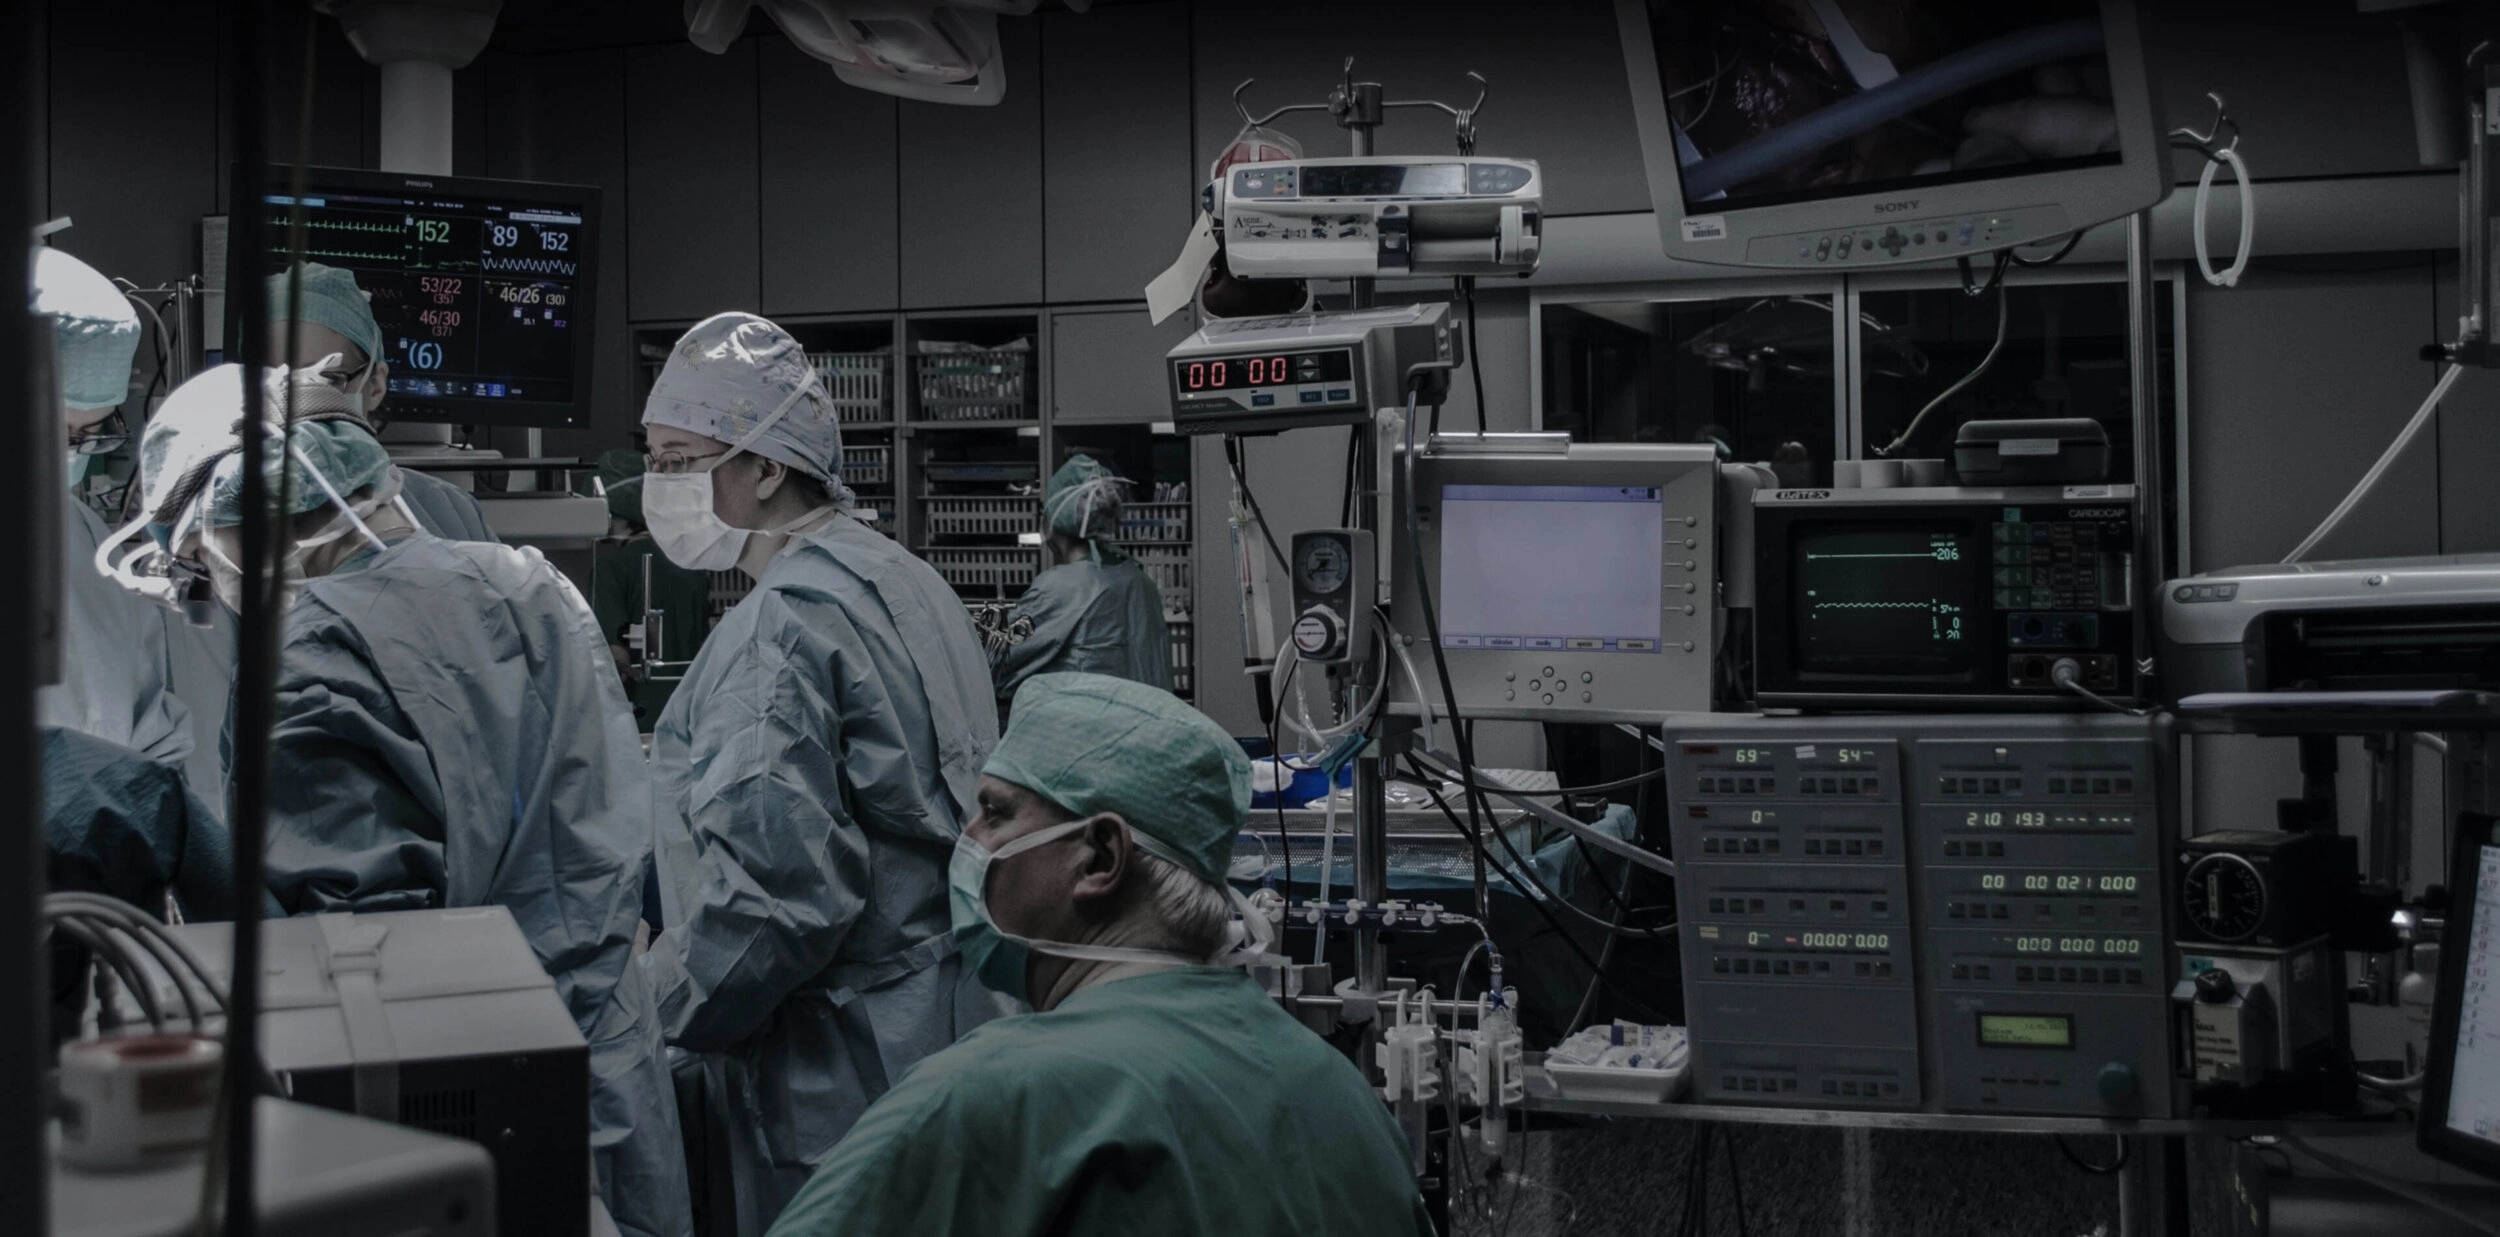 People wearing masks and gowns in an operating theatre environment